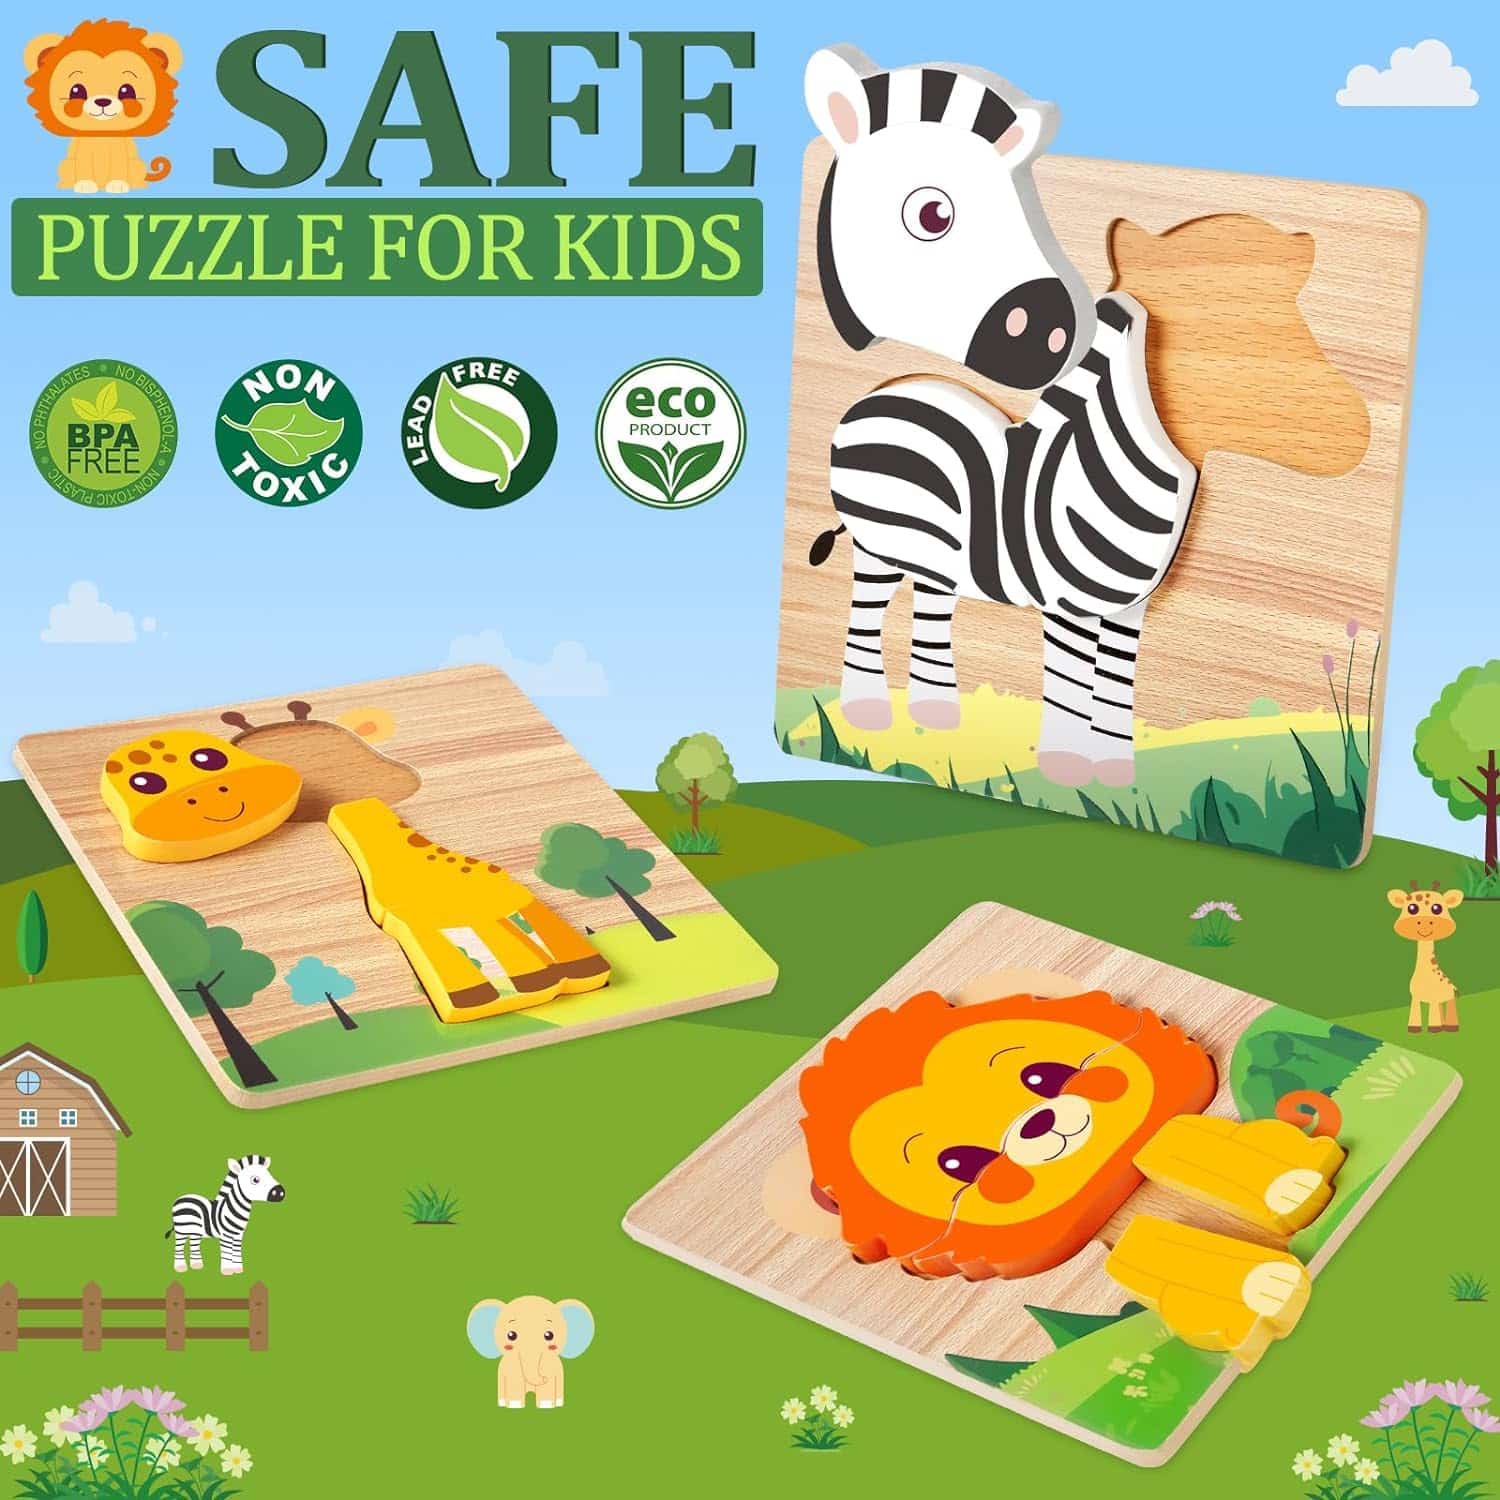 Wooden Puzzles for Toddlers 1-3: A Fun and Educational Review